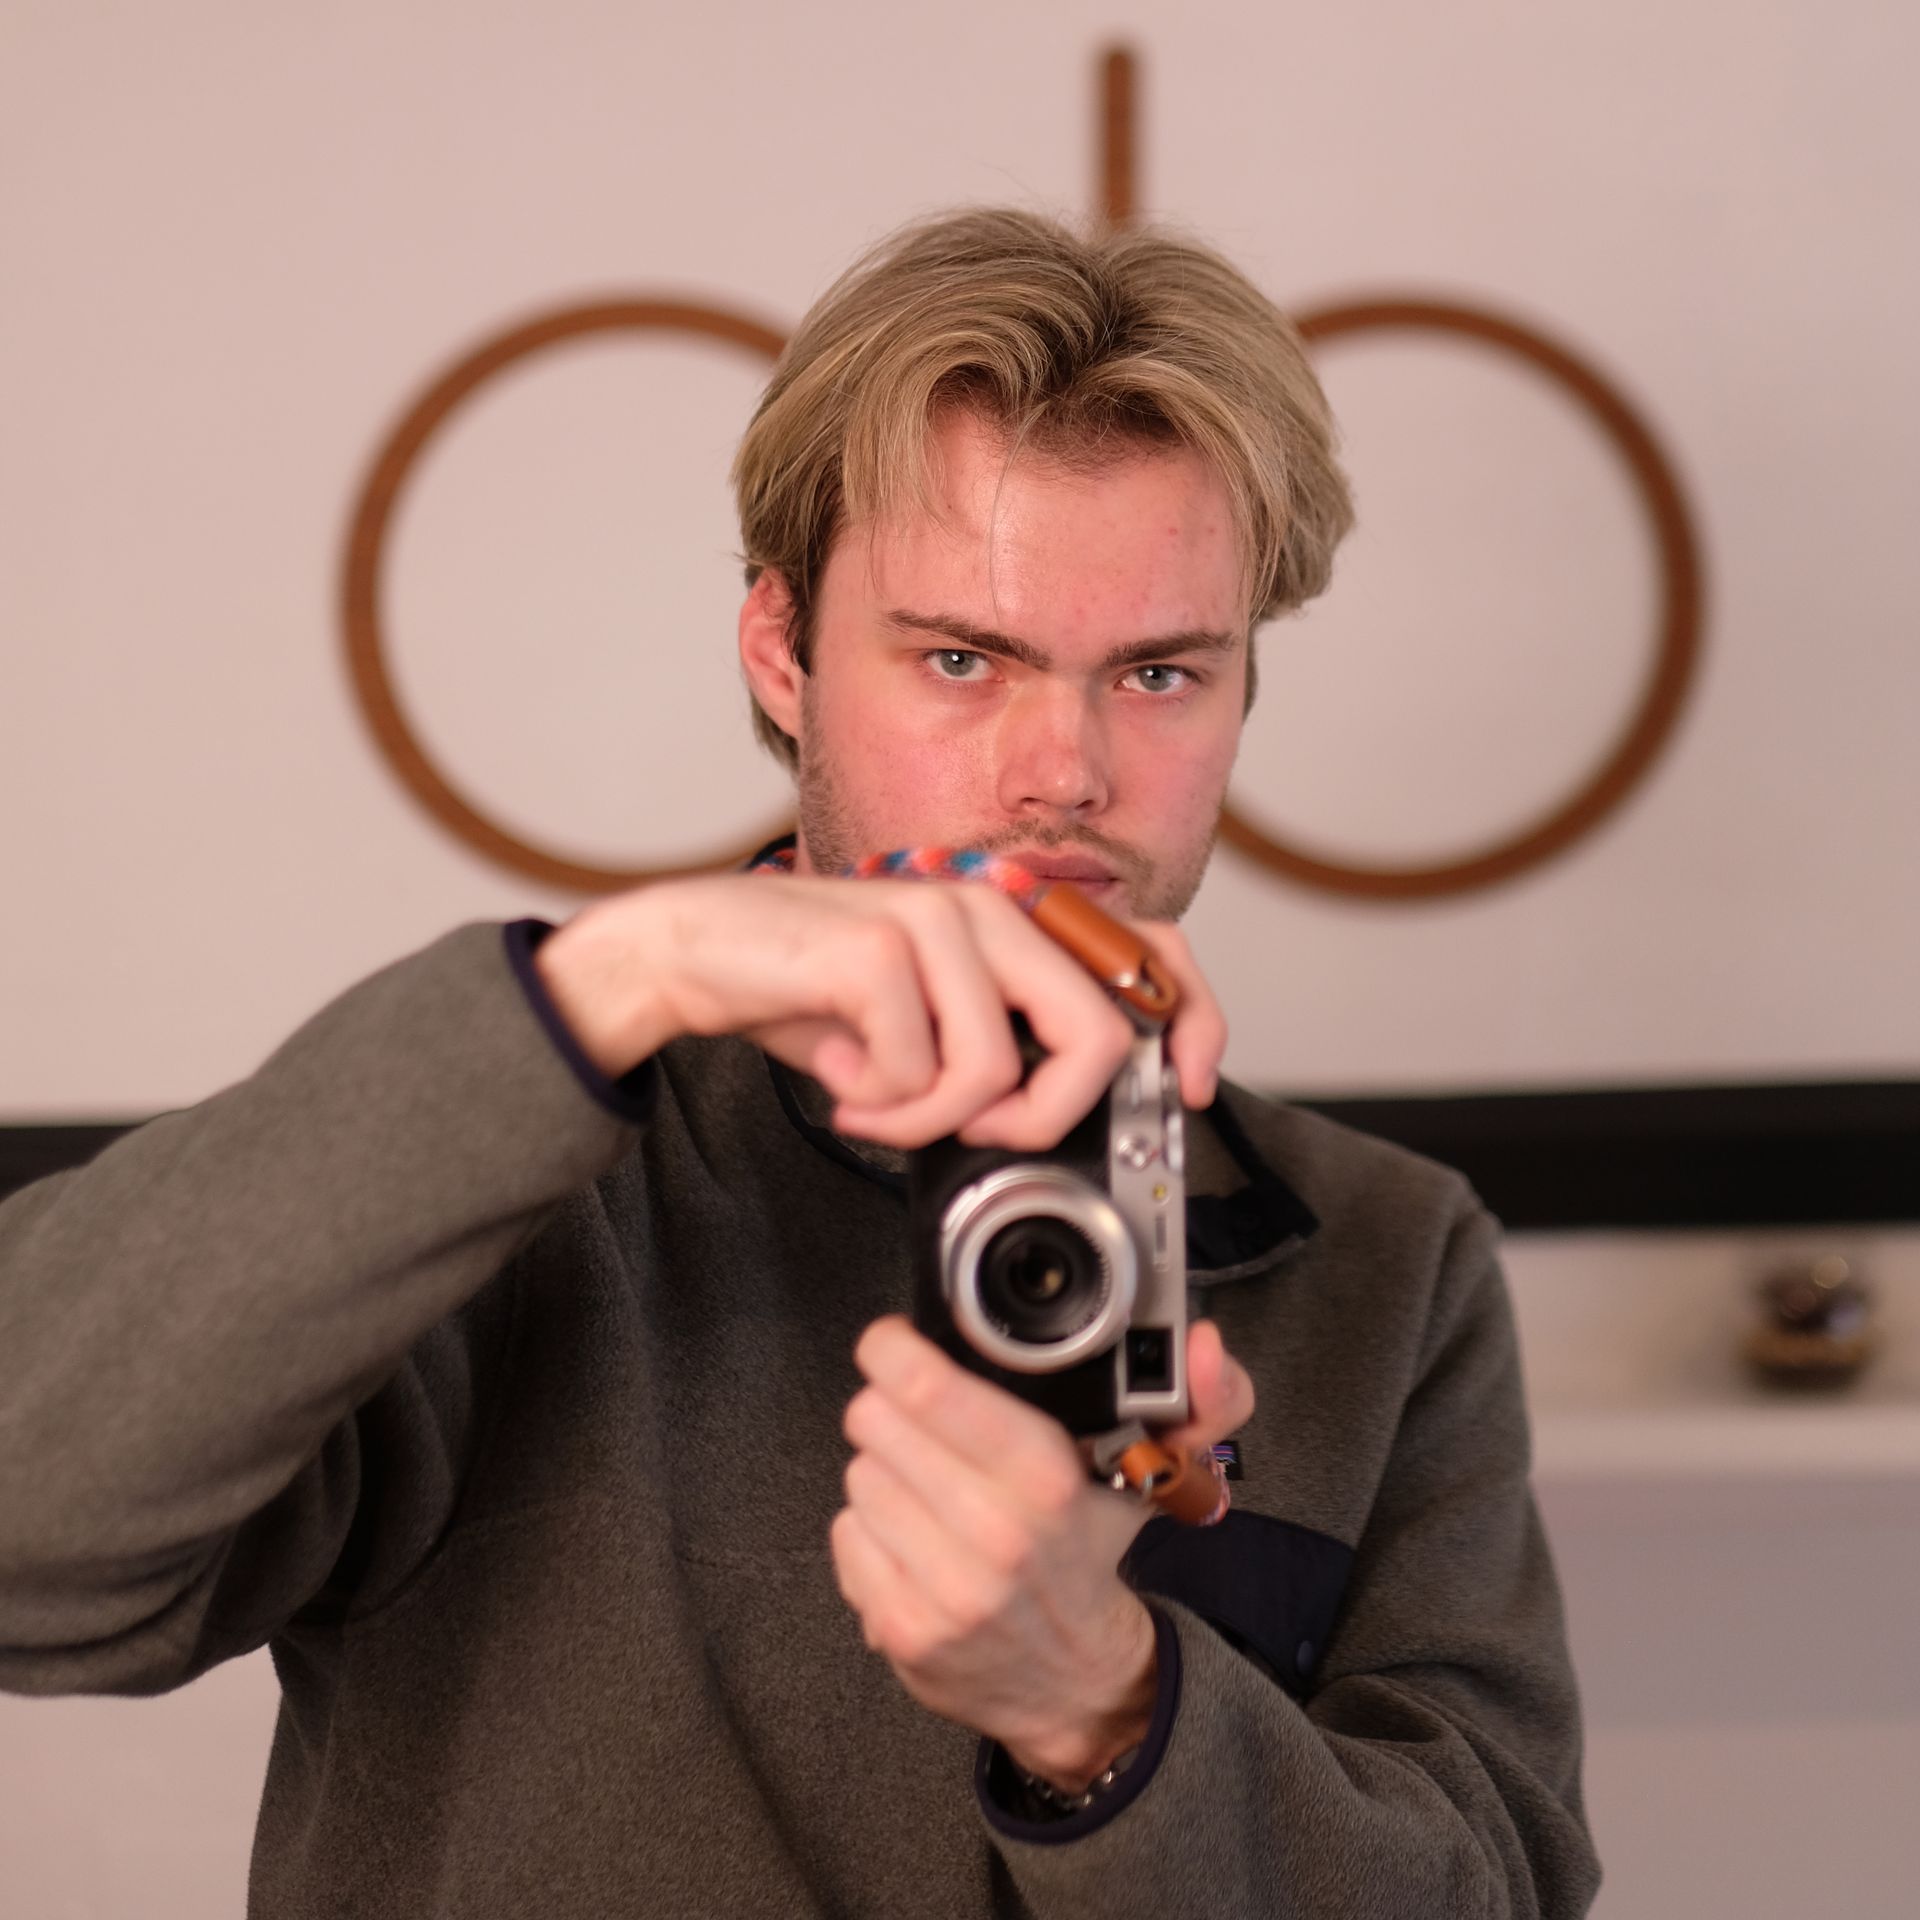 Headshot: a white man with blond hair and stubble holds up a retro camera and looks into the shot, wearing a fleece with a zip